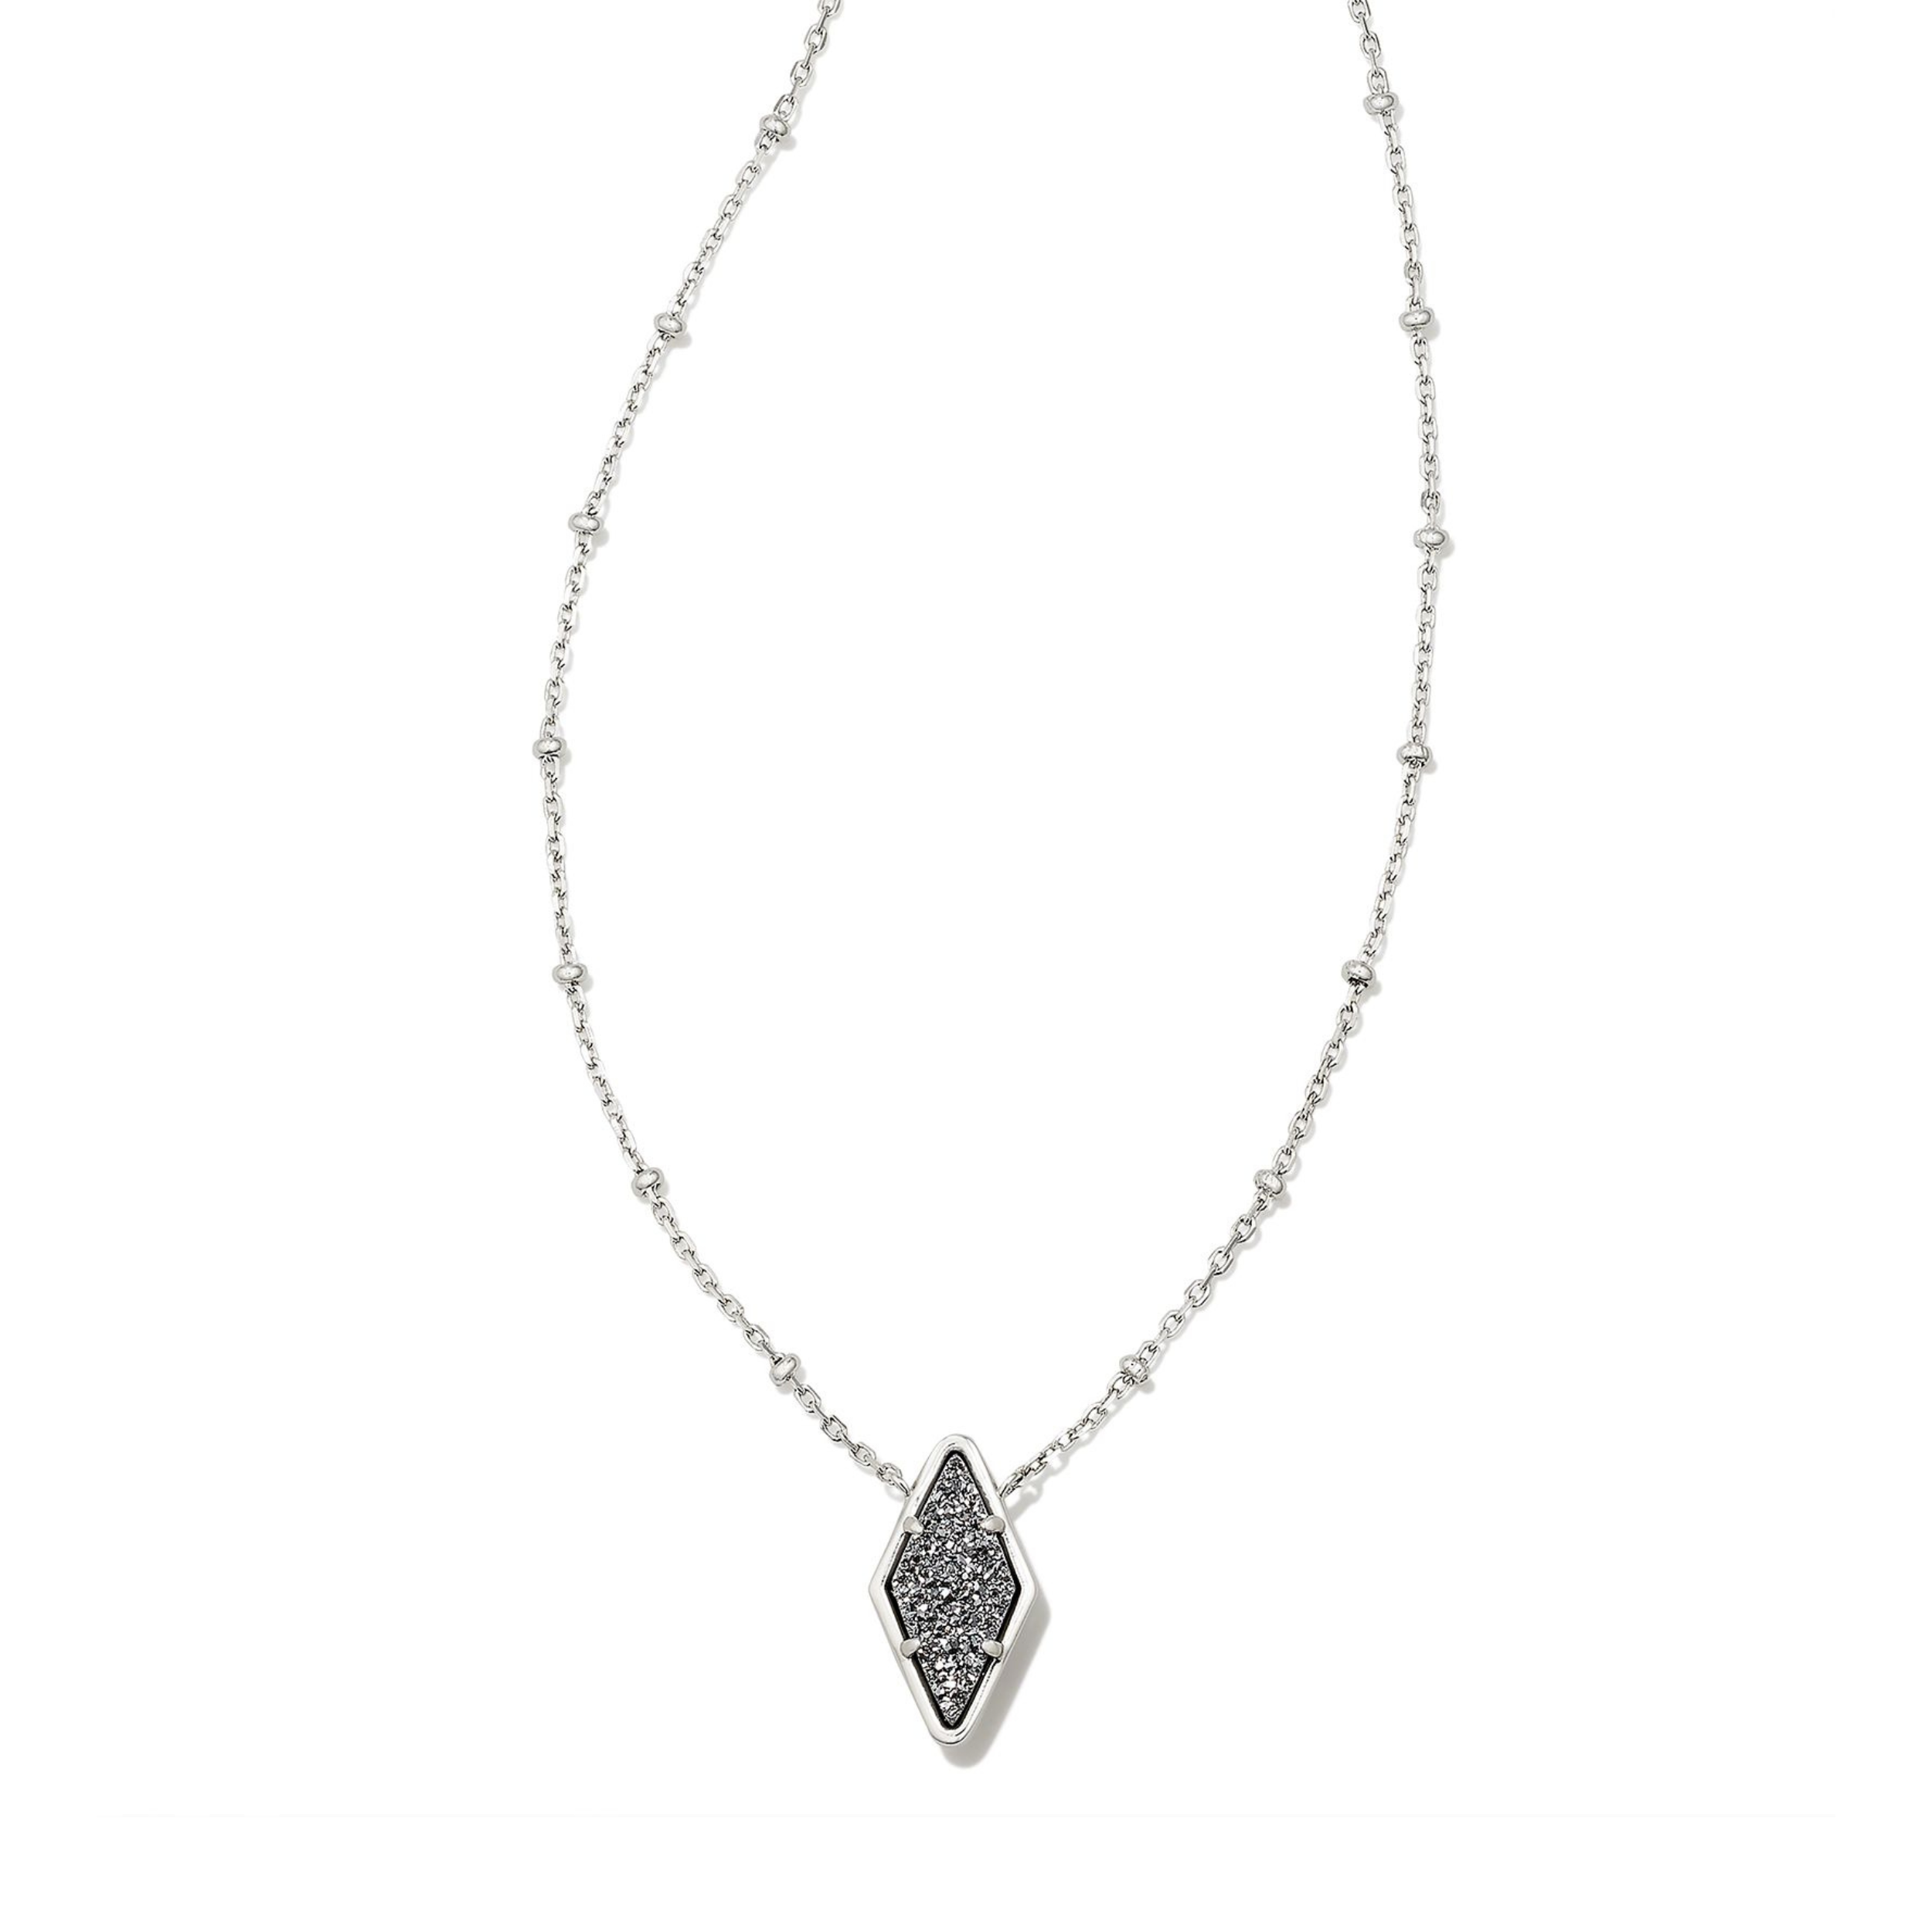 Silver necklace with diamond shaped pendant in platinum drusy pictured on a white background.